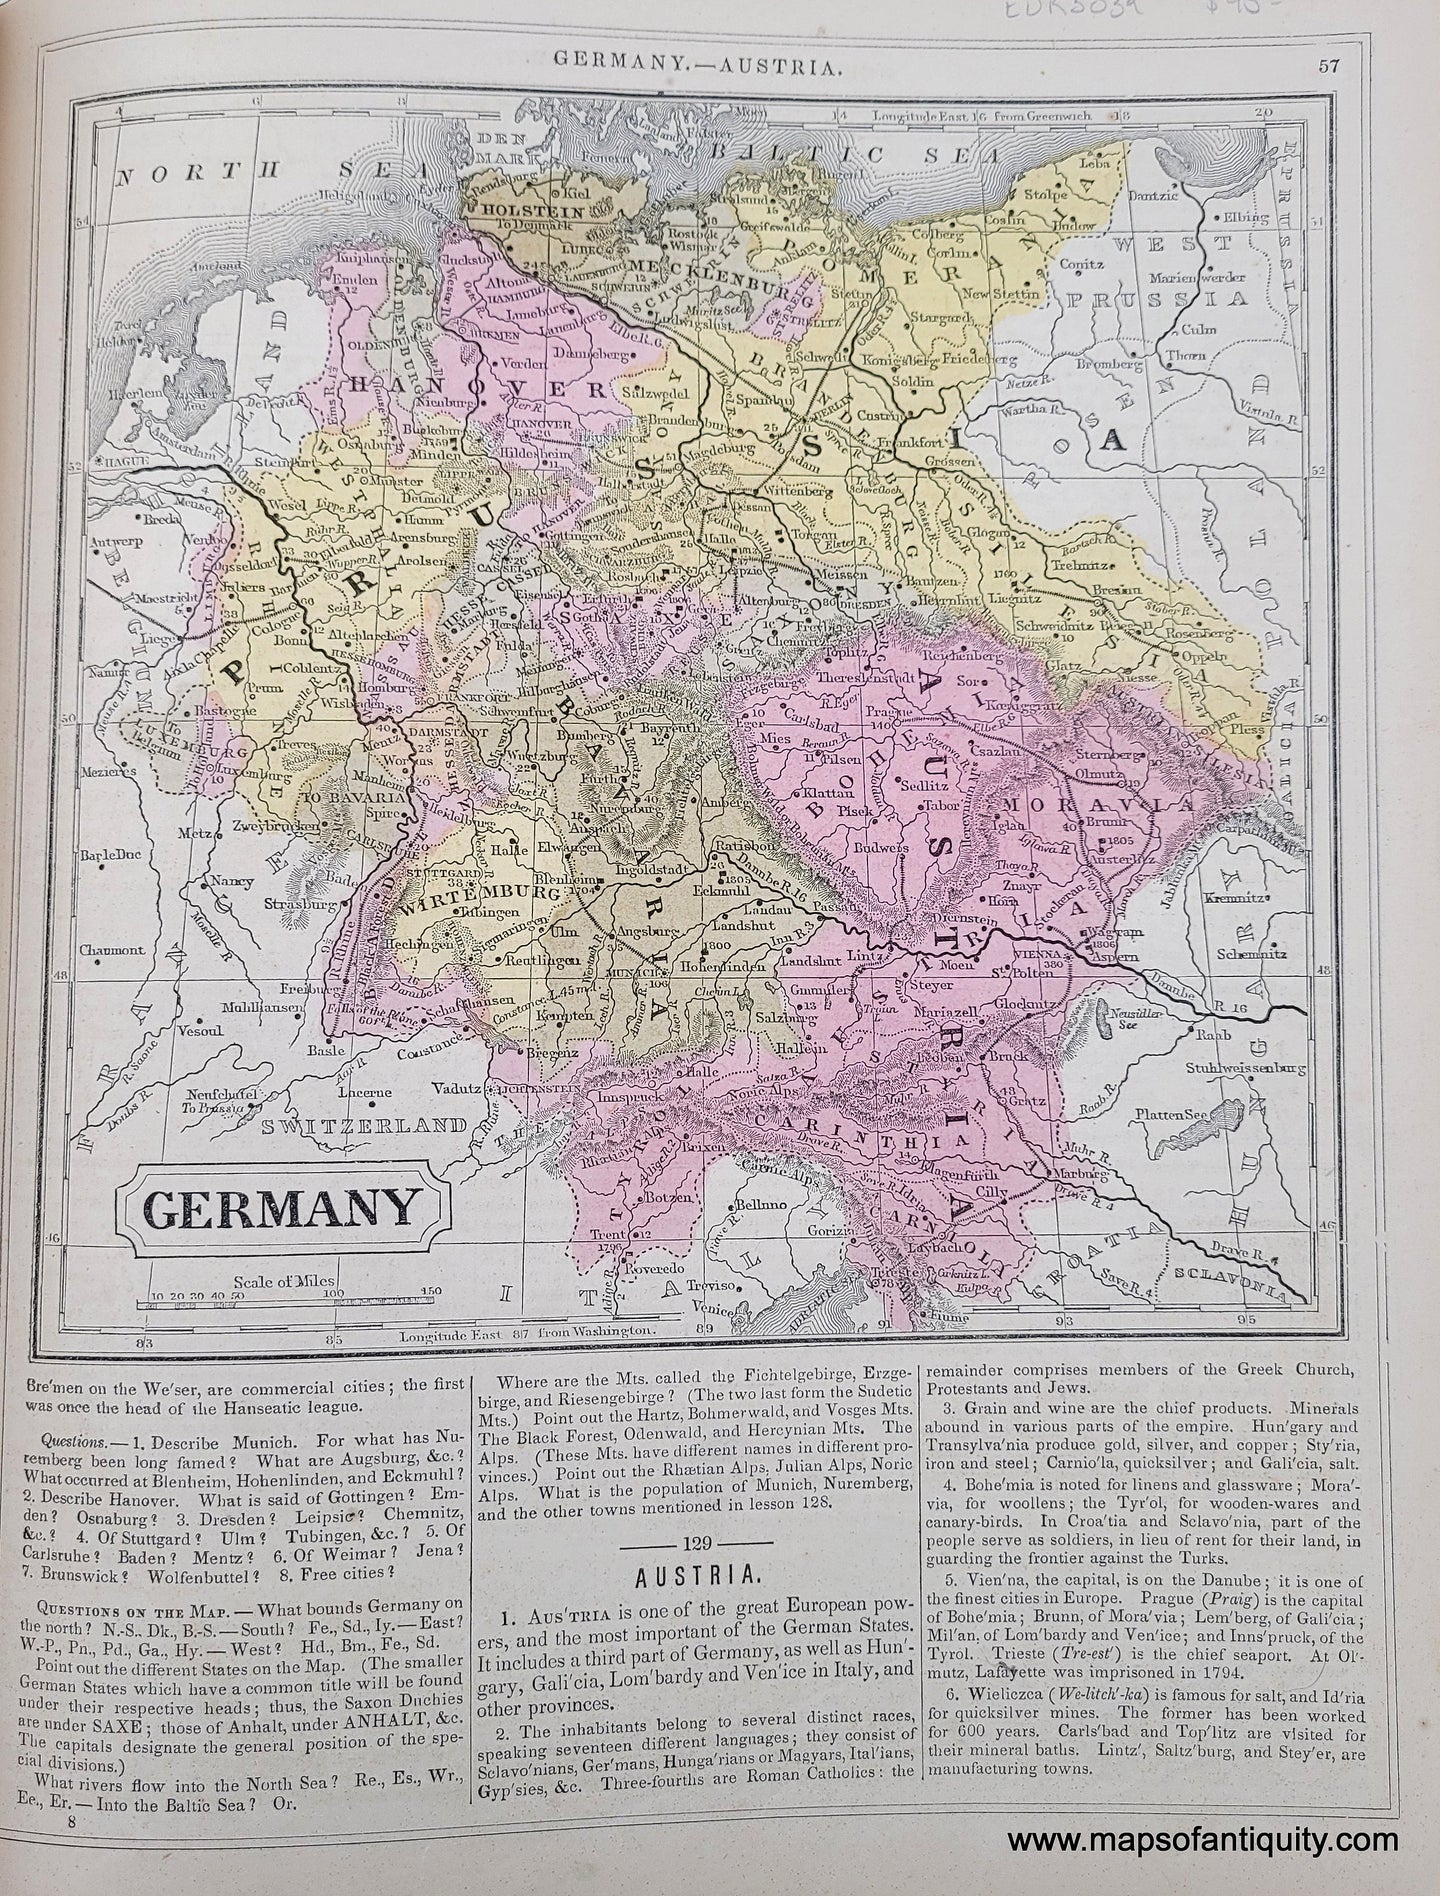 Genuine-Antique-Hand-Colored-Map-Double-sided-page-Germany-verso-Austria-and-Prussia-1850-Mitchell-Thomas-Cowperthwait-Co--Maps-Of-Antiquity